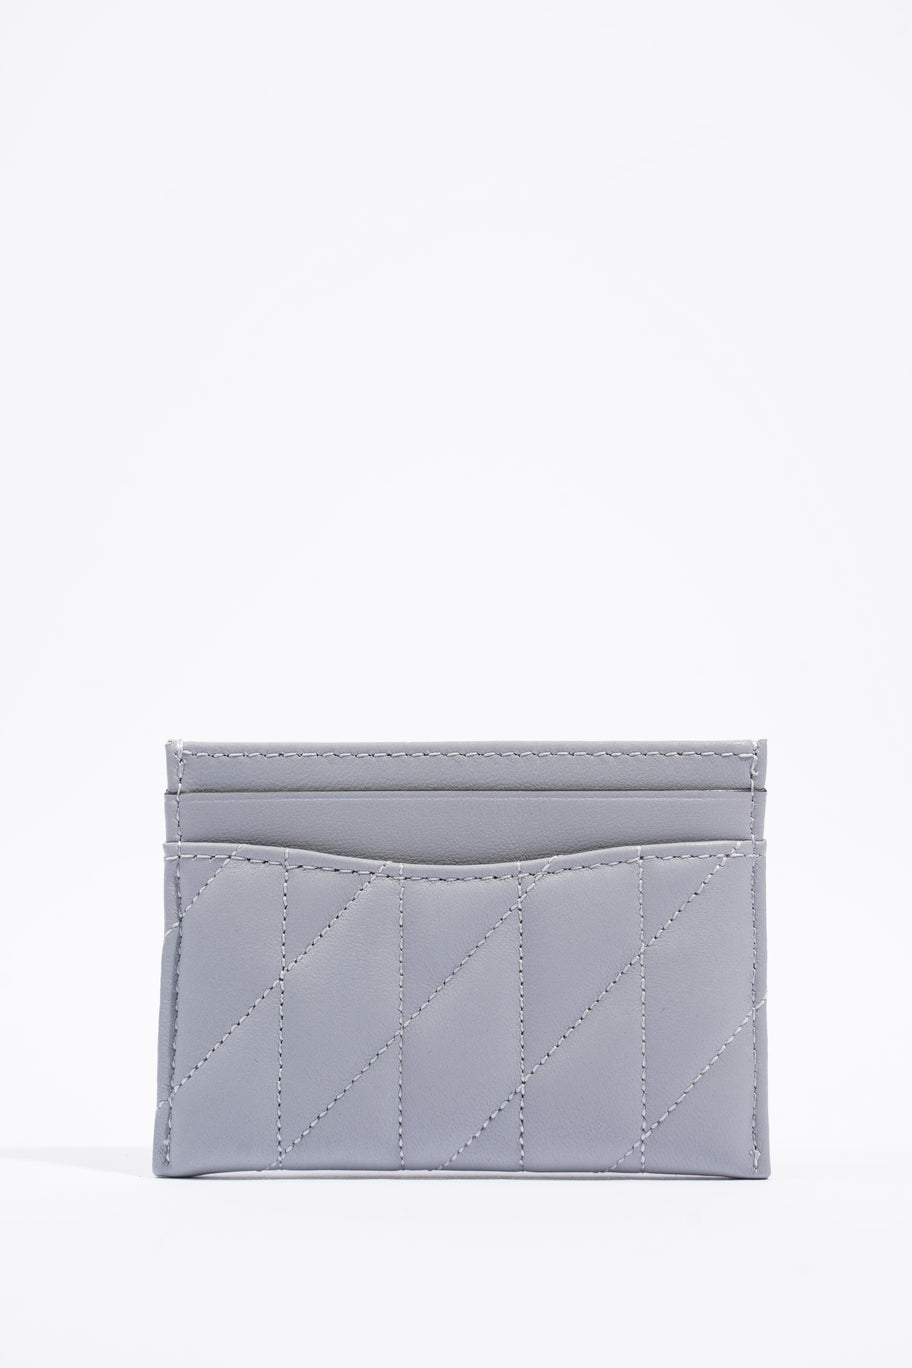 Essential Card Case Grey Lambskin Leather Image 4